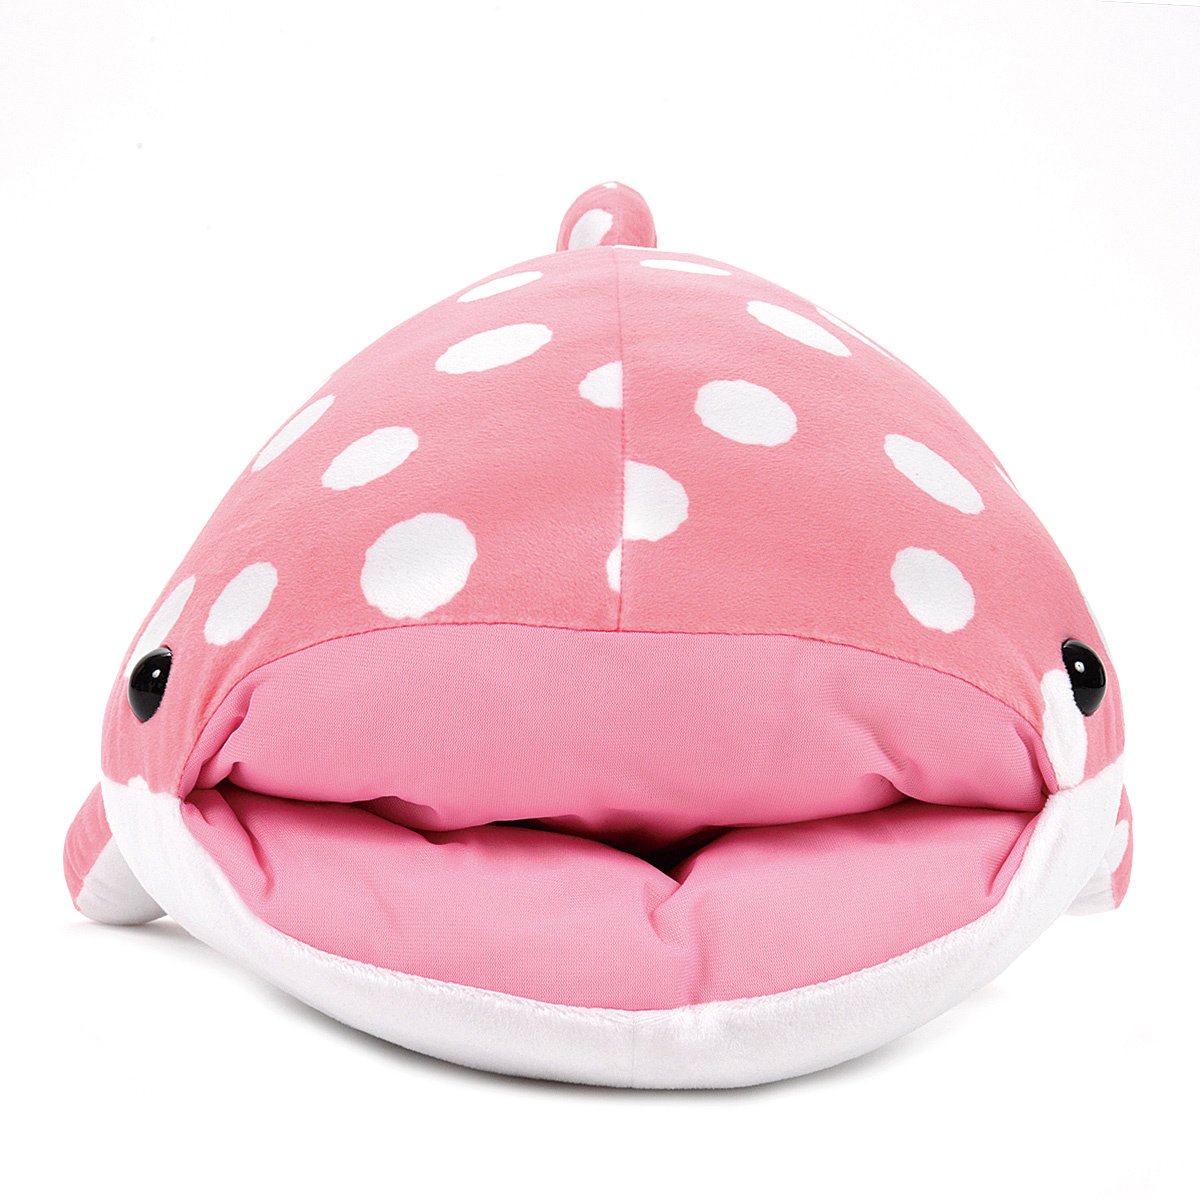 Whale Shark Amuse Dotted Plush Toy Stuffed Animal Pink White